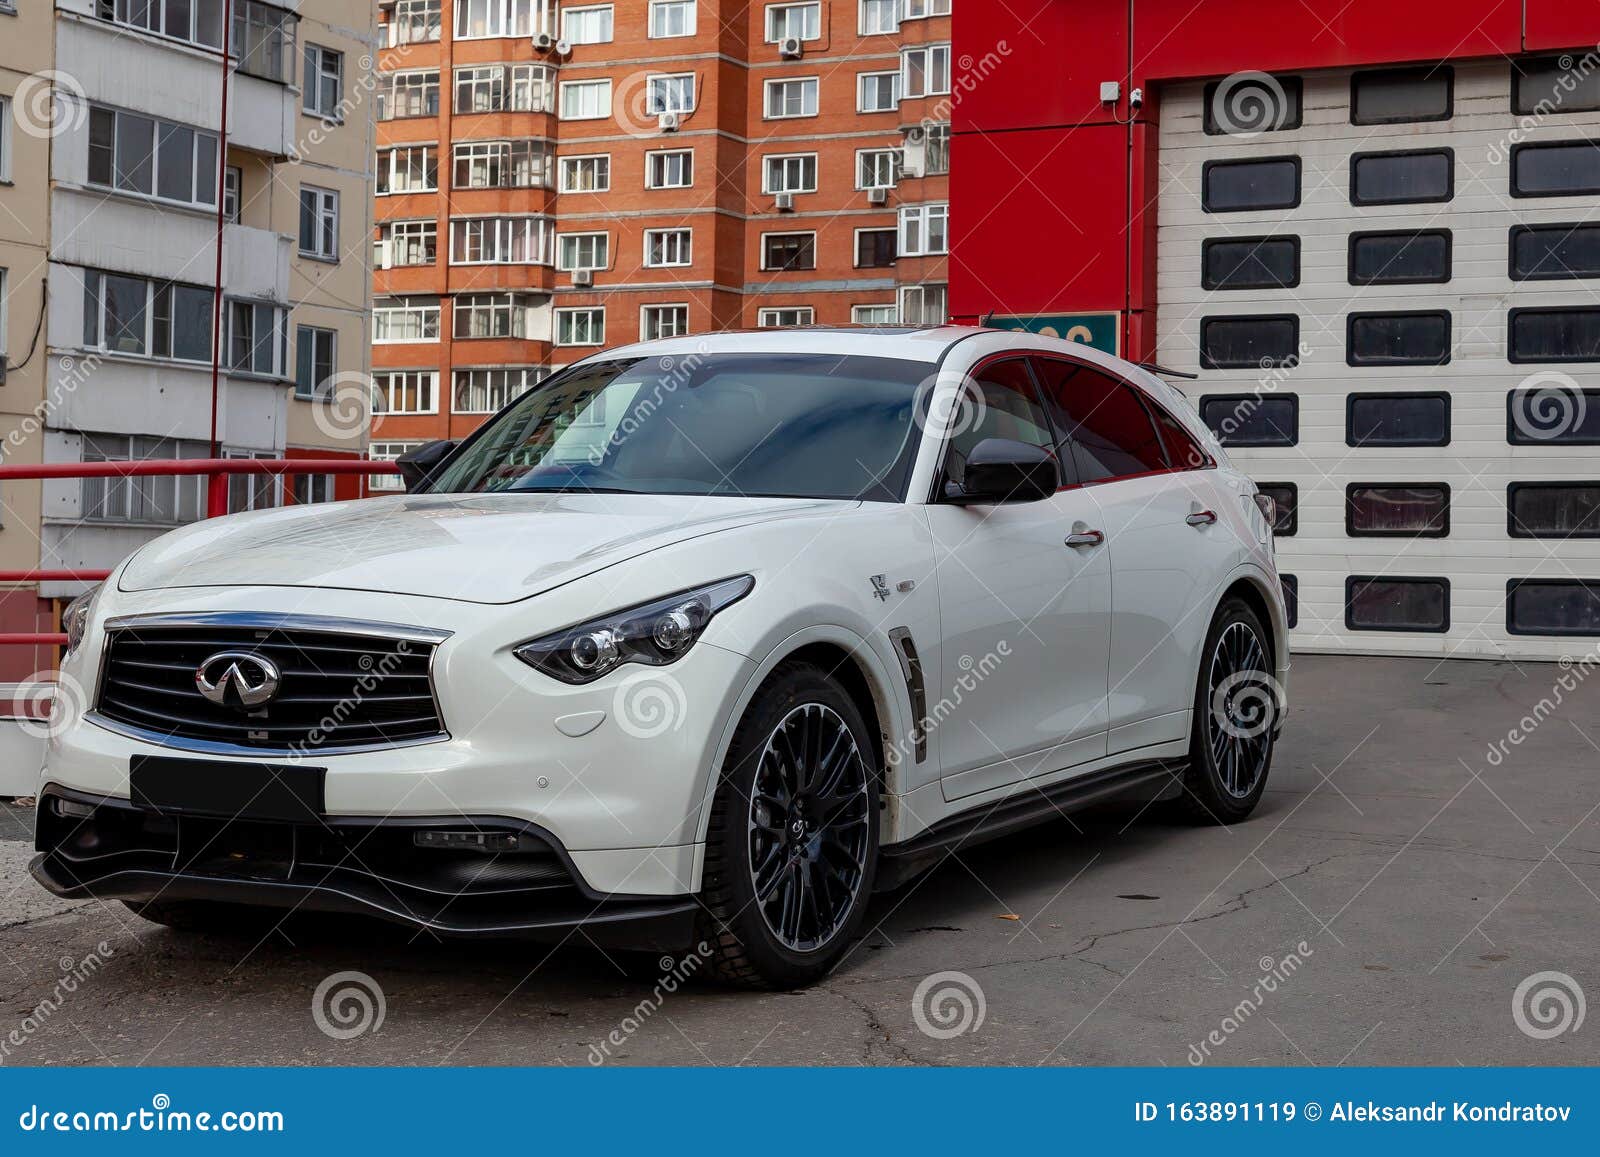 White Infiniti FX35 FX45 FX50 QX70 in Sebastian Vettel Limited Edition  Tuning Front View on the Car Parking in the Street Editorial Stock Image -  Image of expensive, detail: 163891119